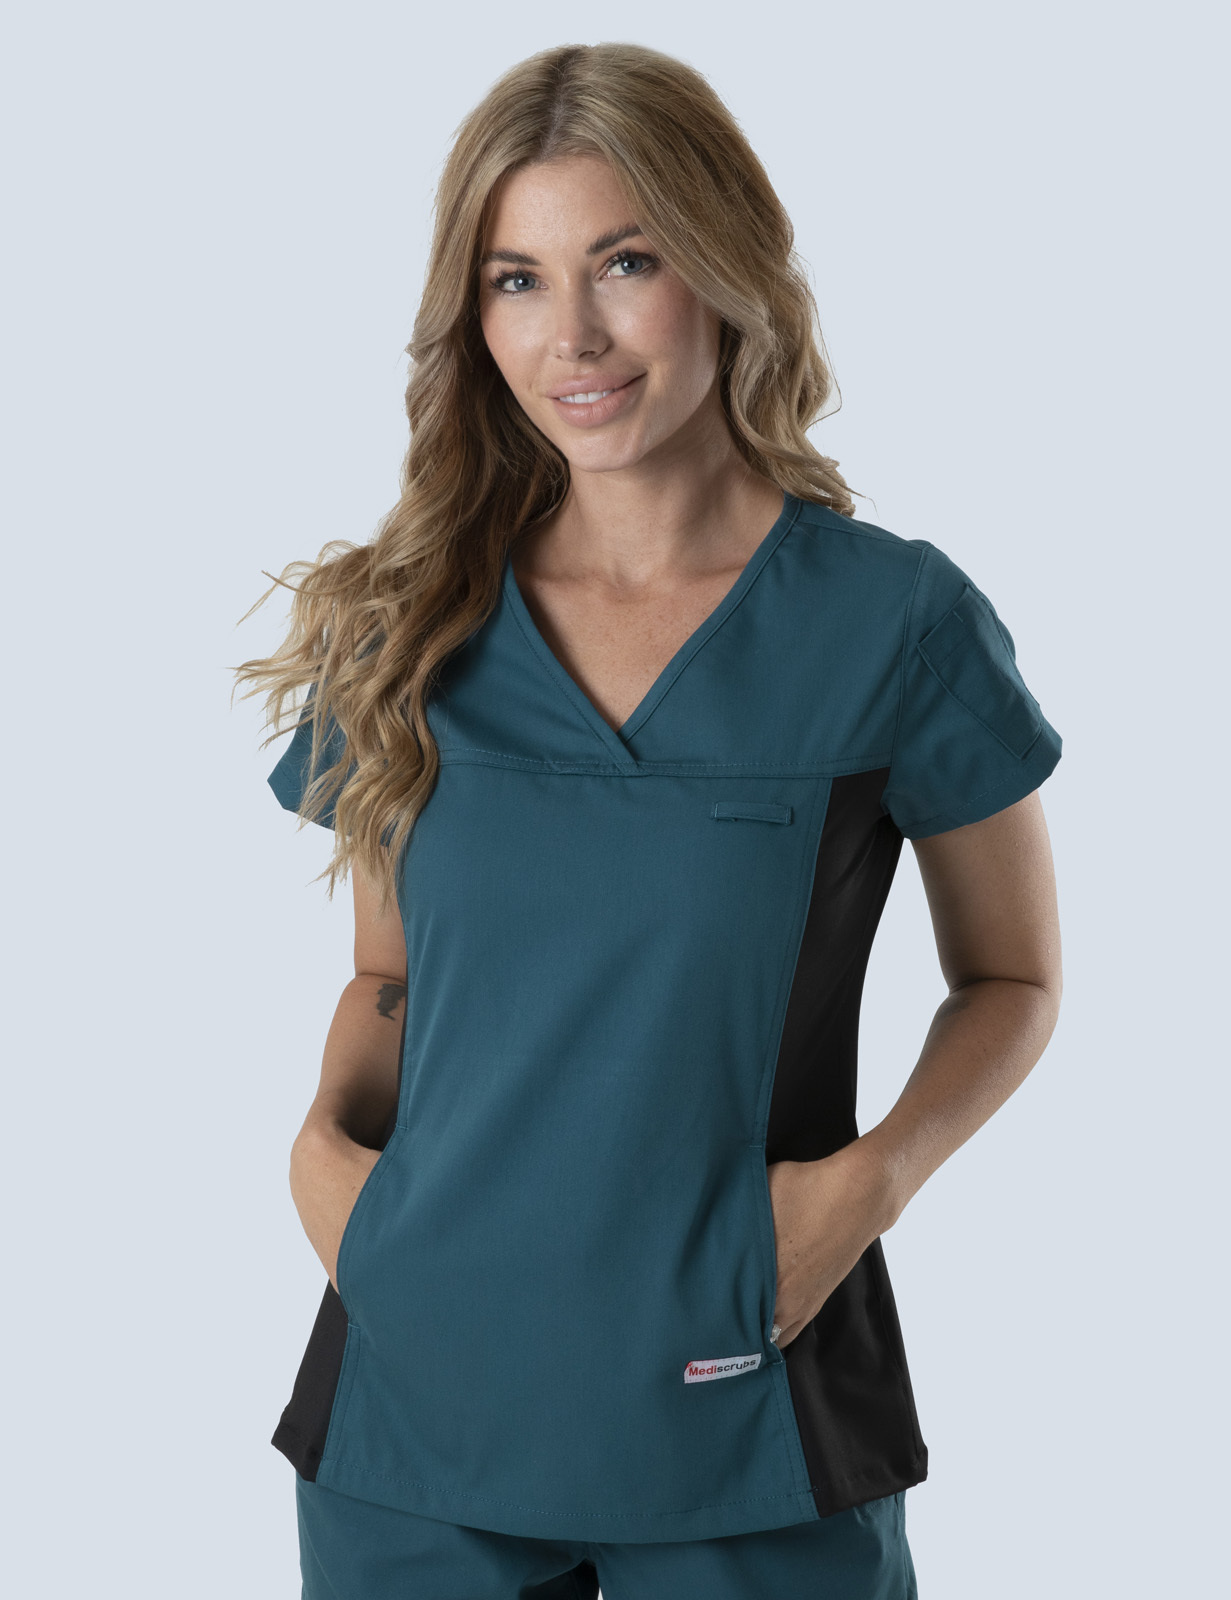 Pathology North (Women's Fit Spandex Scrub Top in Caribbean and Cargo Pants in Black incl Logos)